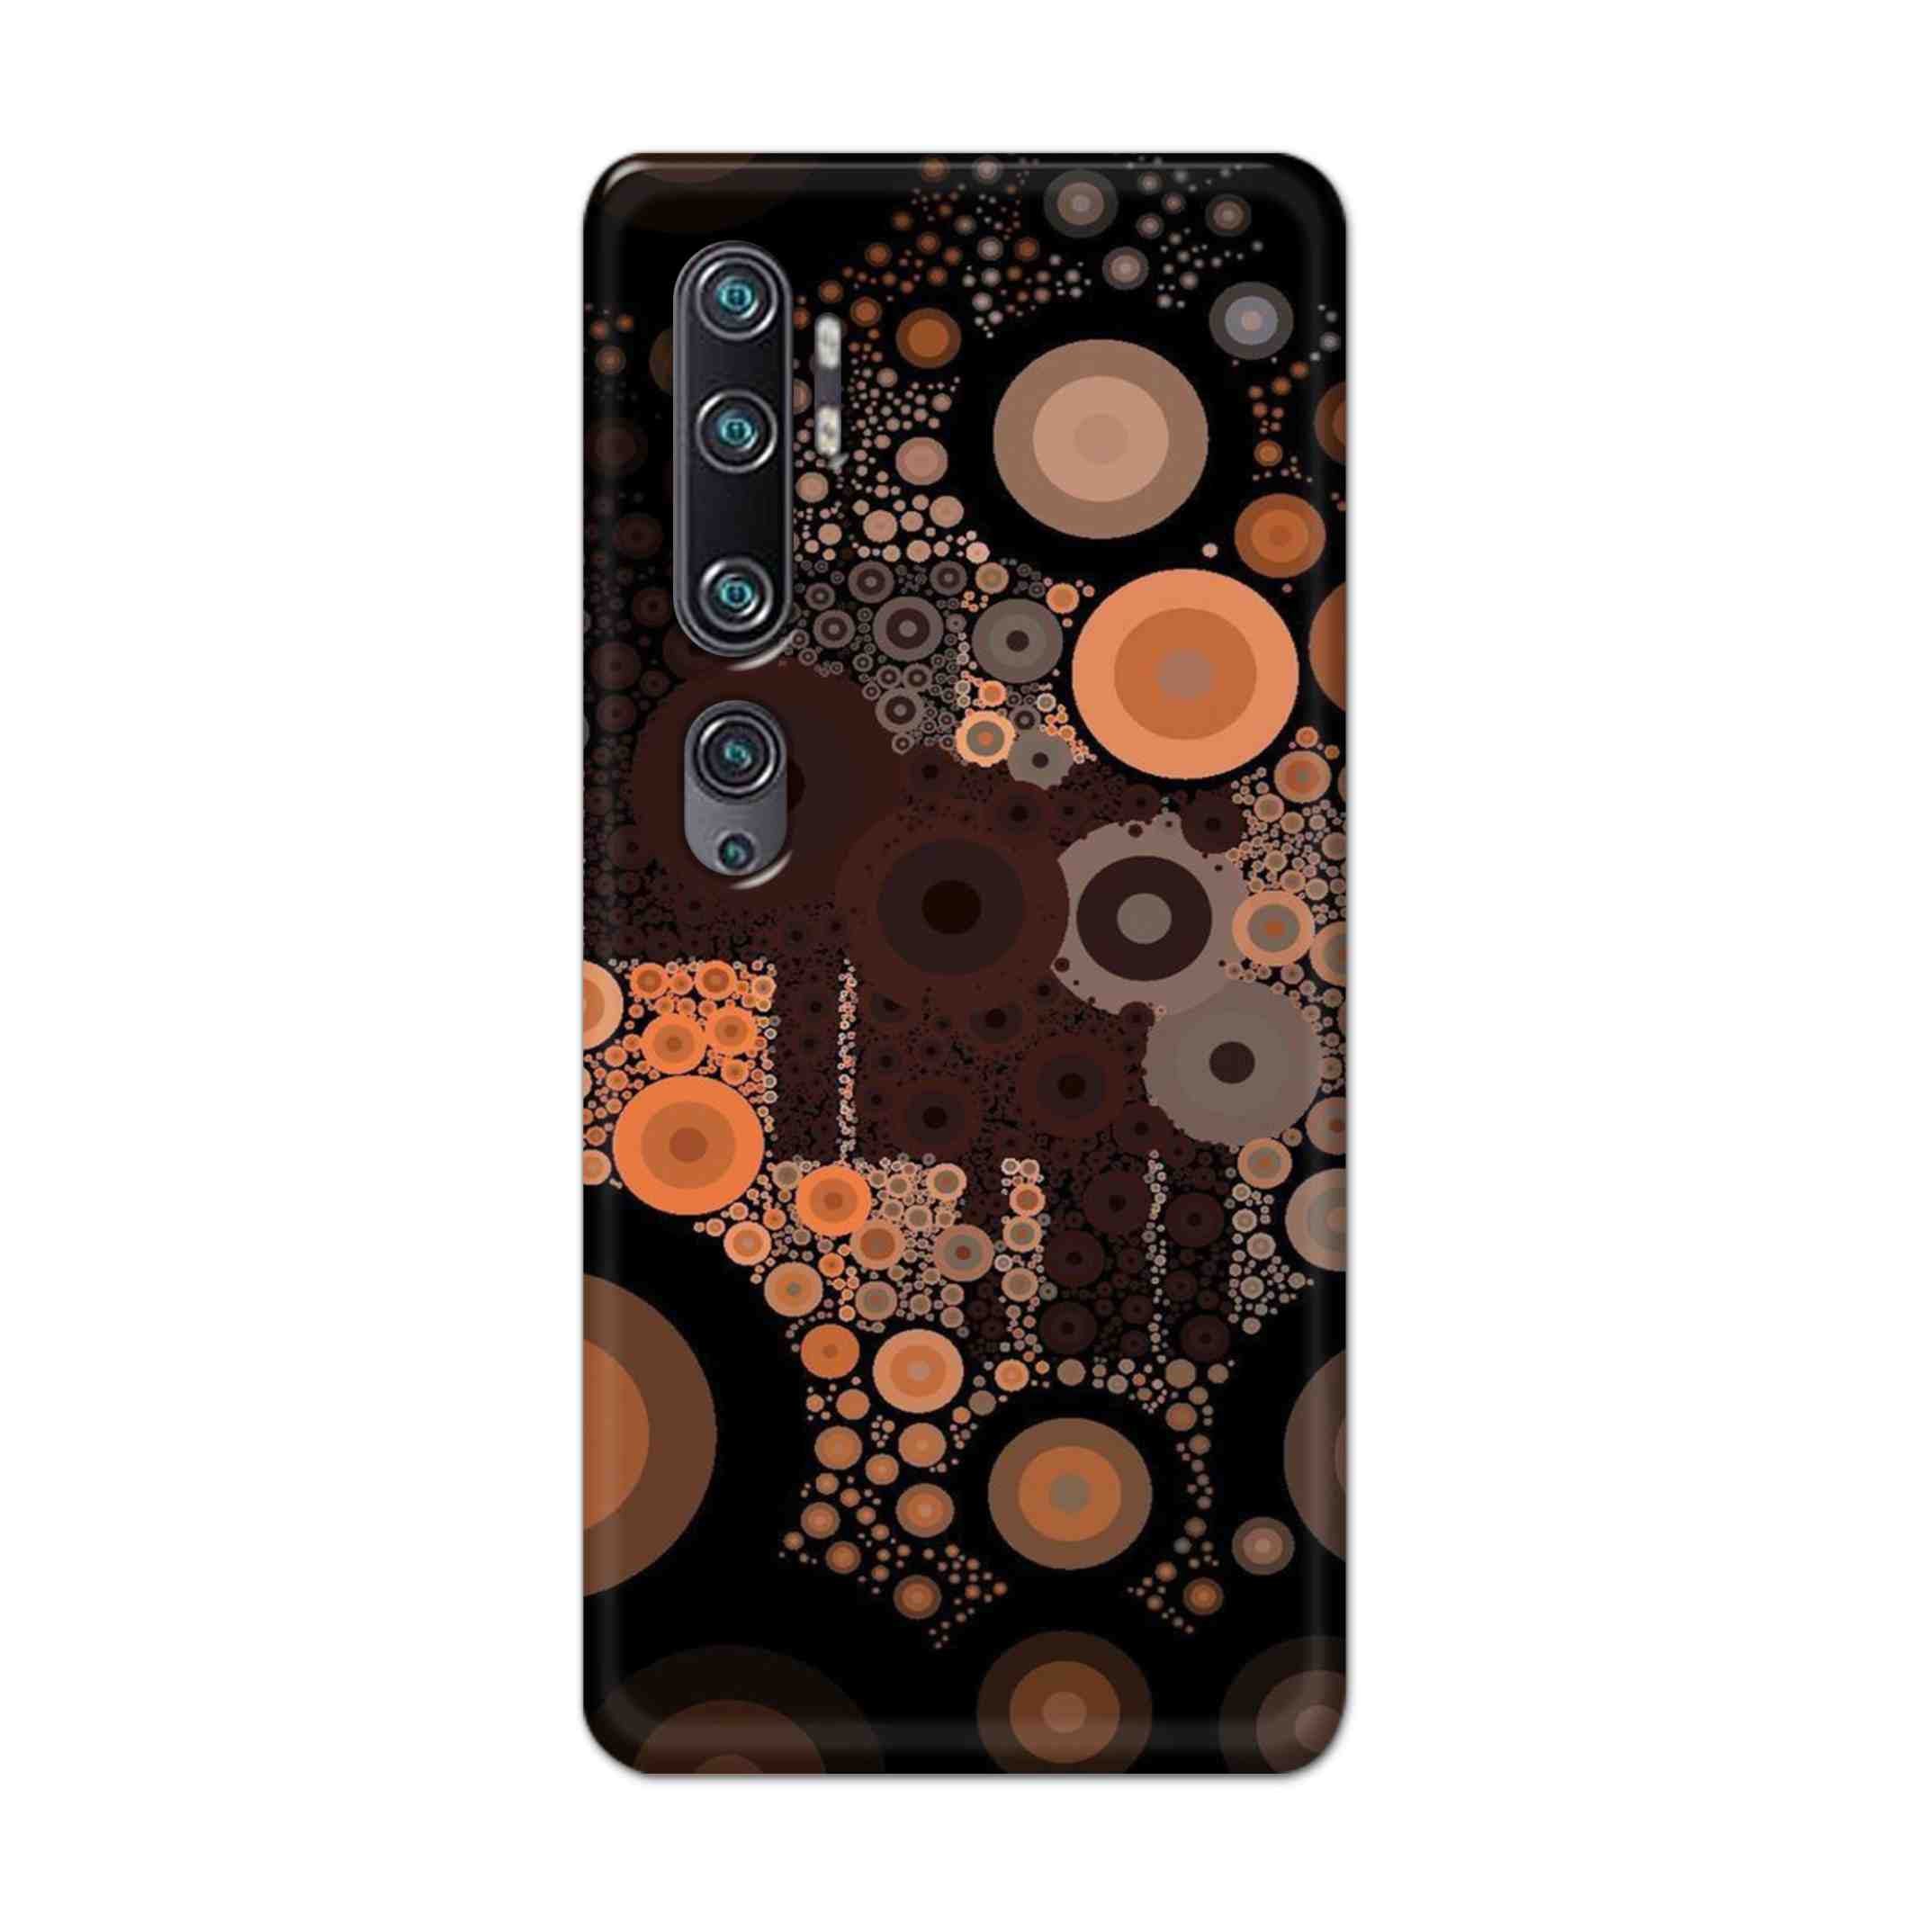 Buy Golden Circle Hard Back Mobile Phone Case Cover For Xiaomi Mi Note 10 Pro Online